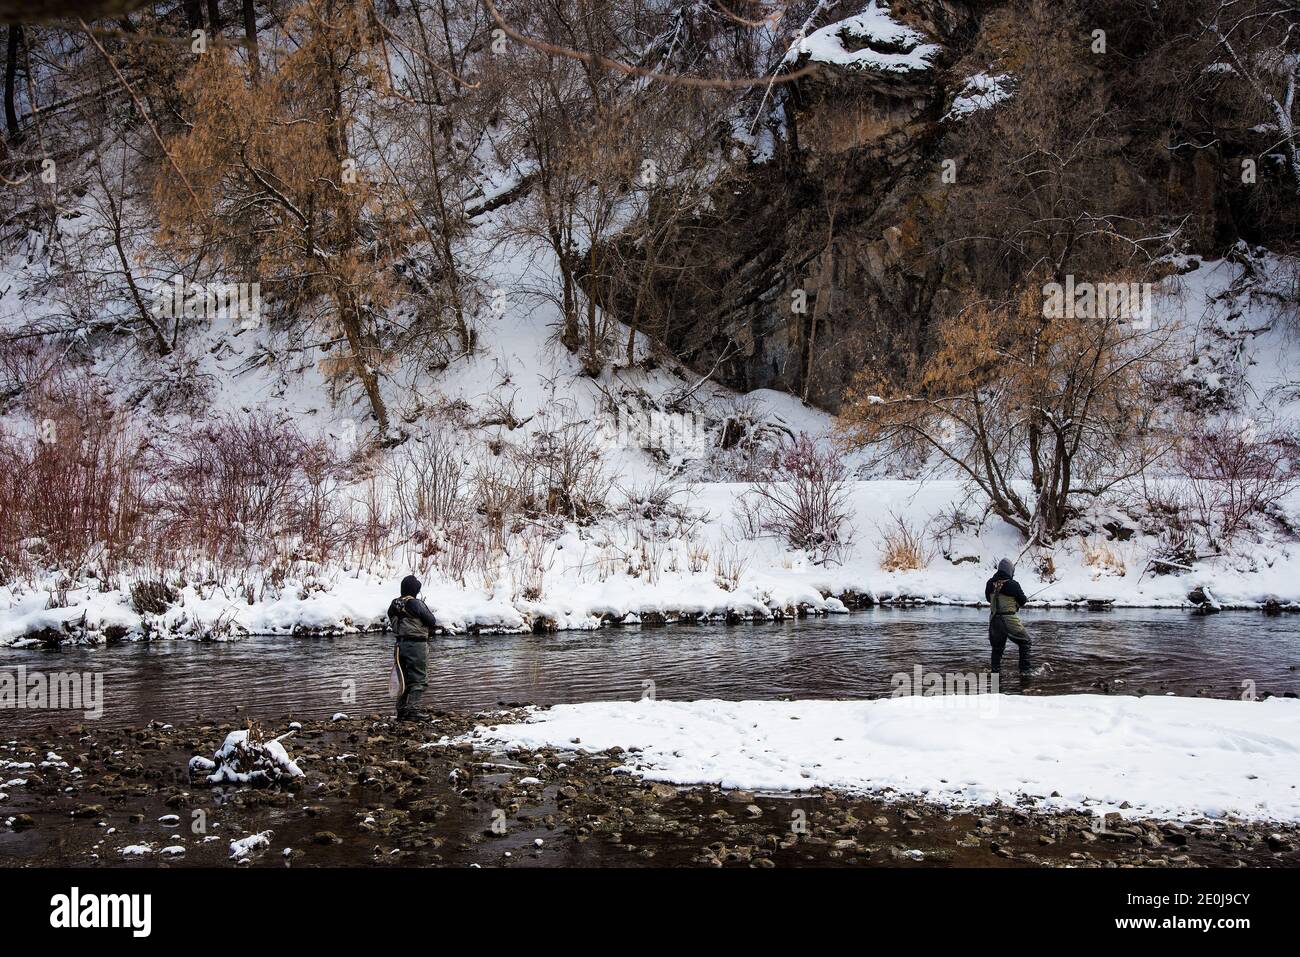 Fly fisherman, fishing in the cold waters of winter.  Passion and interest for the sport is necessary in these frigid temperatures. Stock Photo